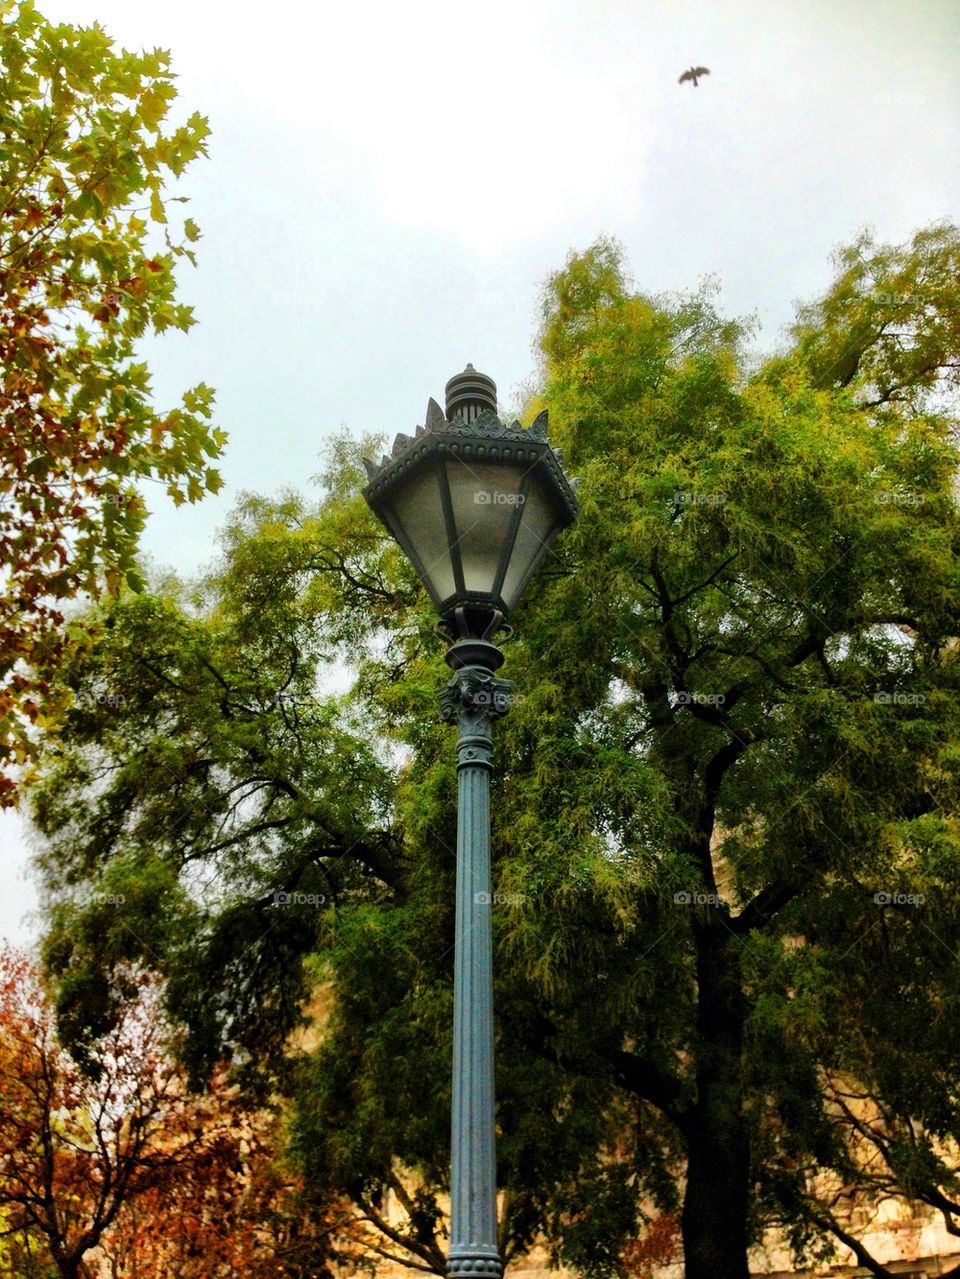 The lamp in the Park